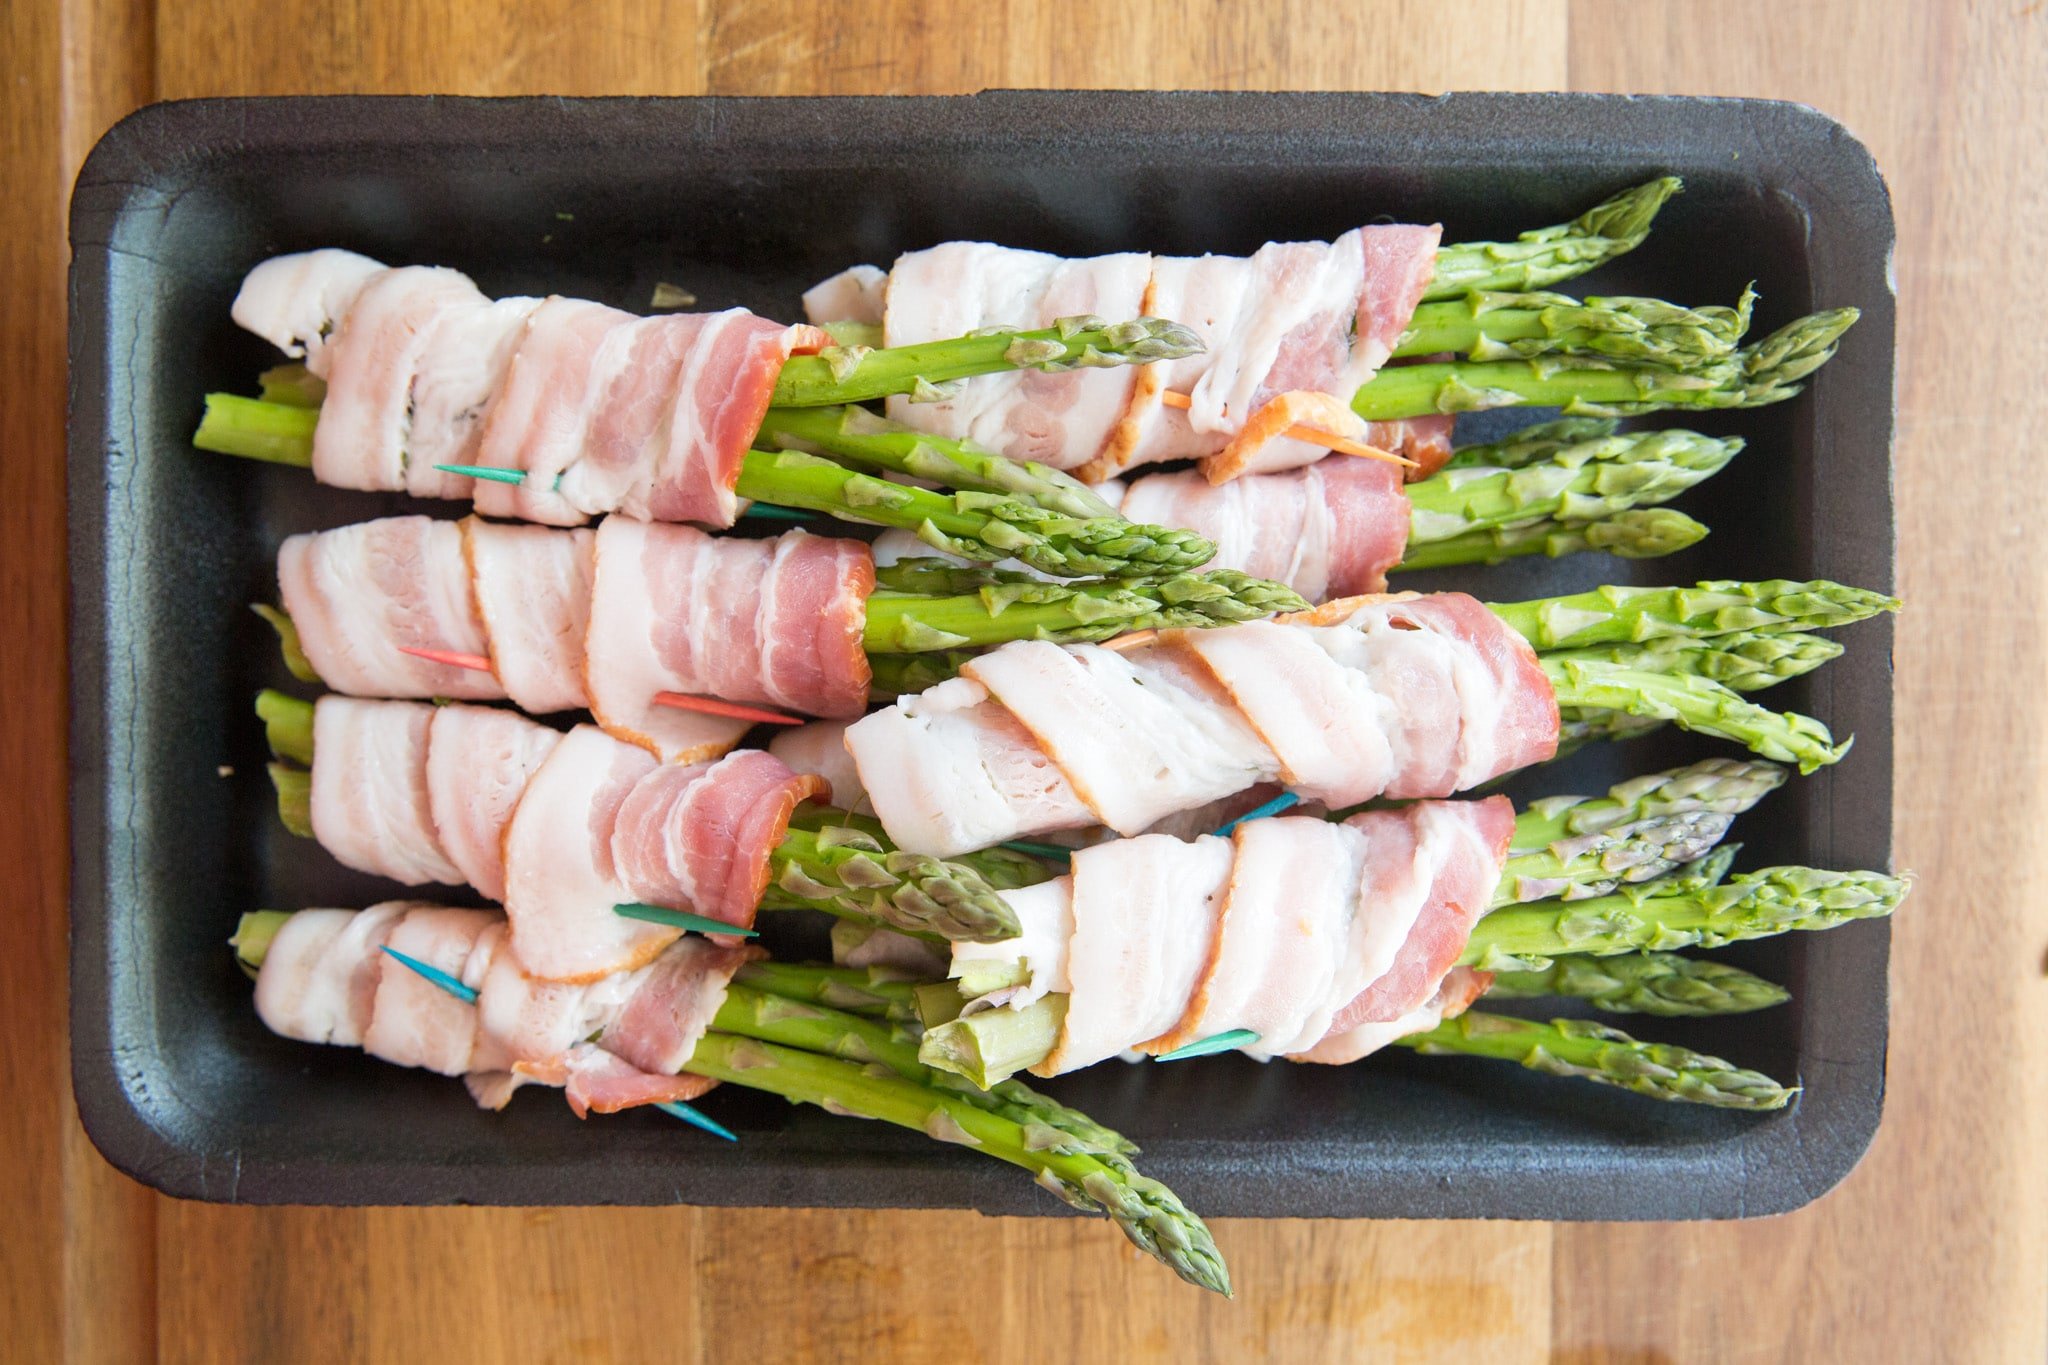 Make this Keto Grilled Bacon Wrapped Asparagus Recipe as a perfect side to your favorite grilled steak or chicken recipe. This is so easy and delicious! A perfect keto side dish recipe that fits into any low carb diet plan!